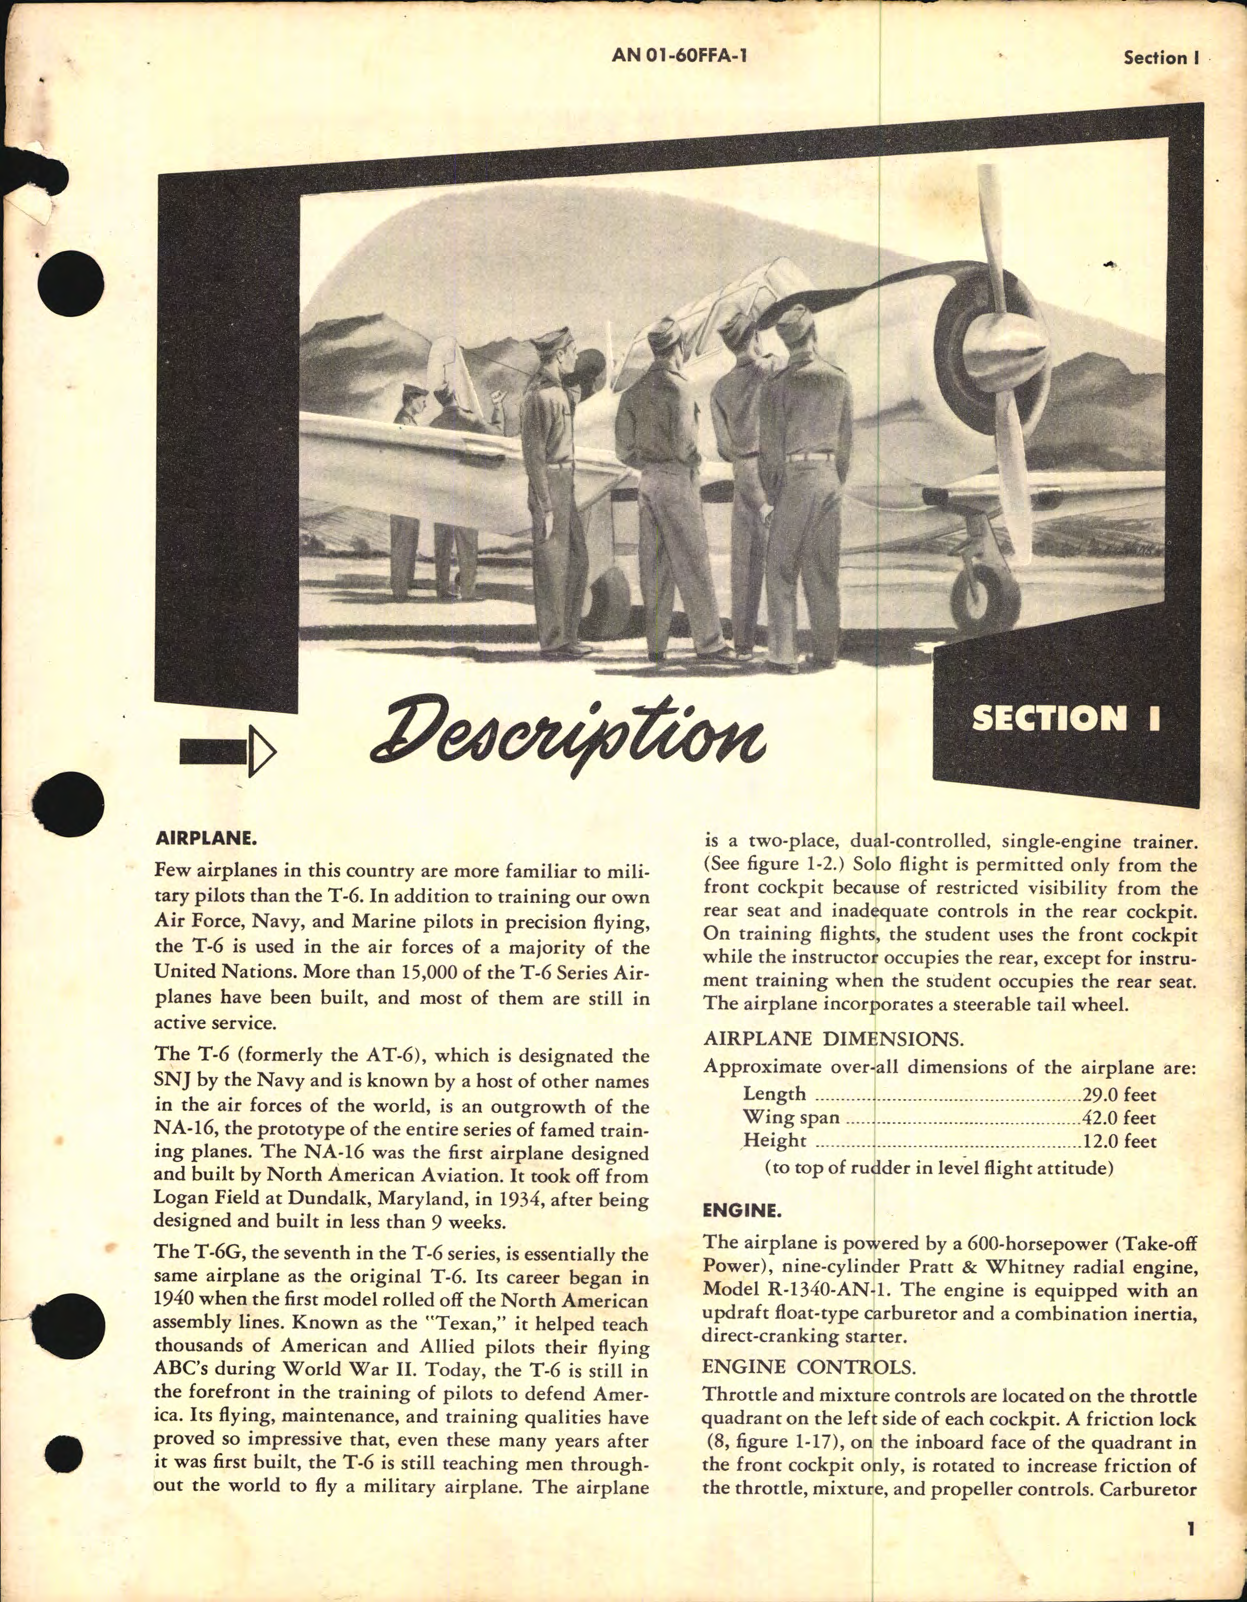 Sample page 7 from AirCorps Library document: Flight Handbook for T-6G